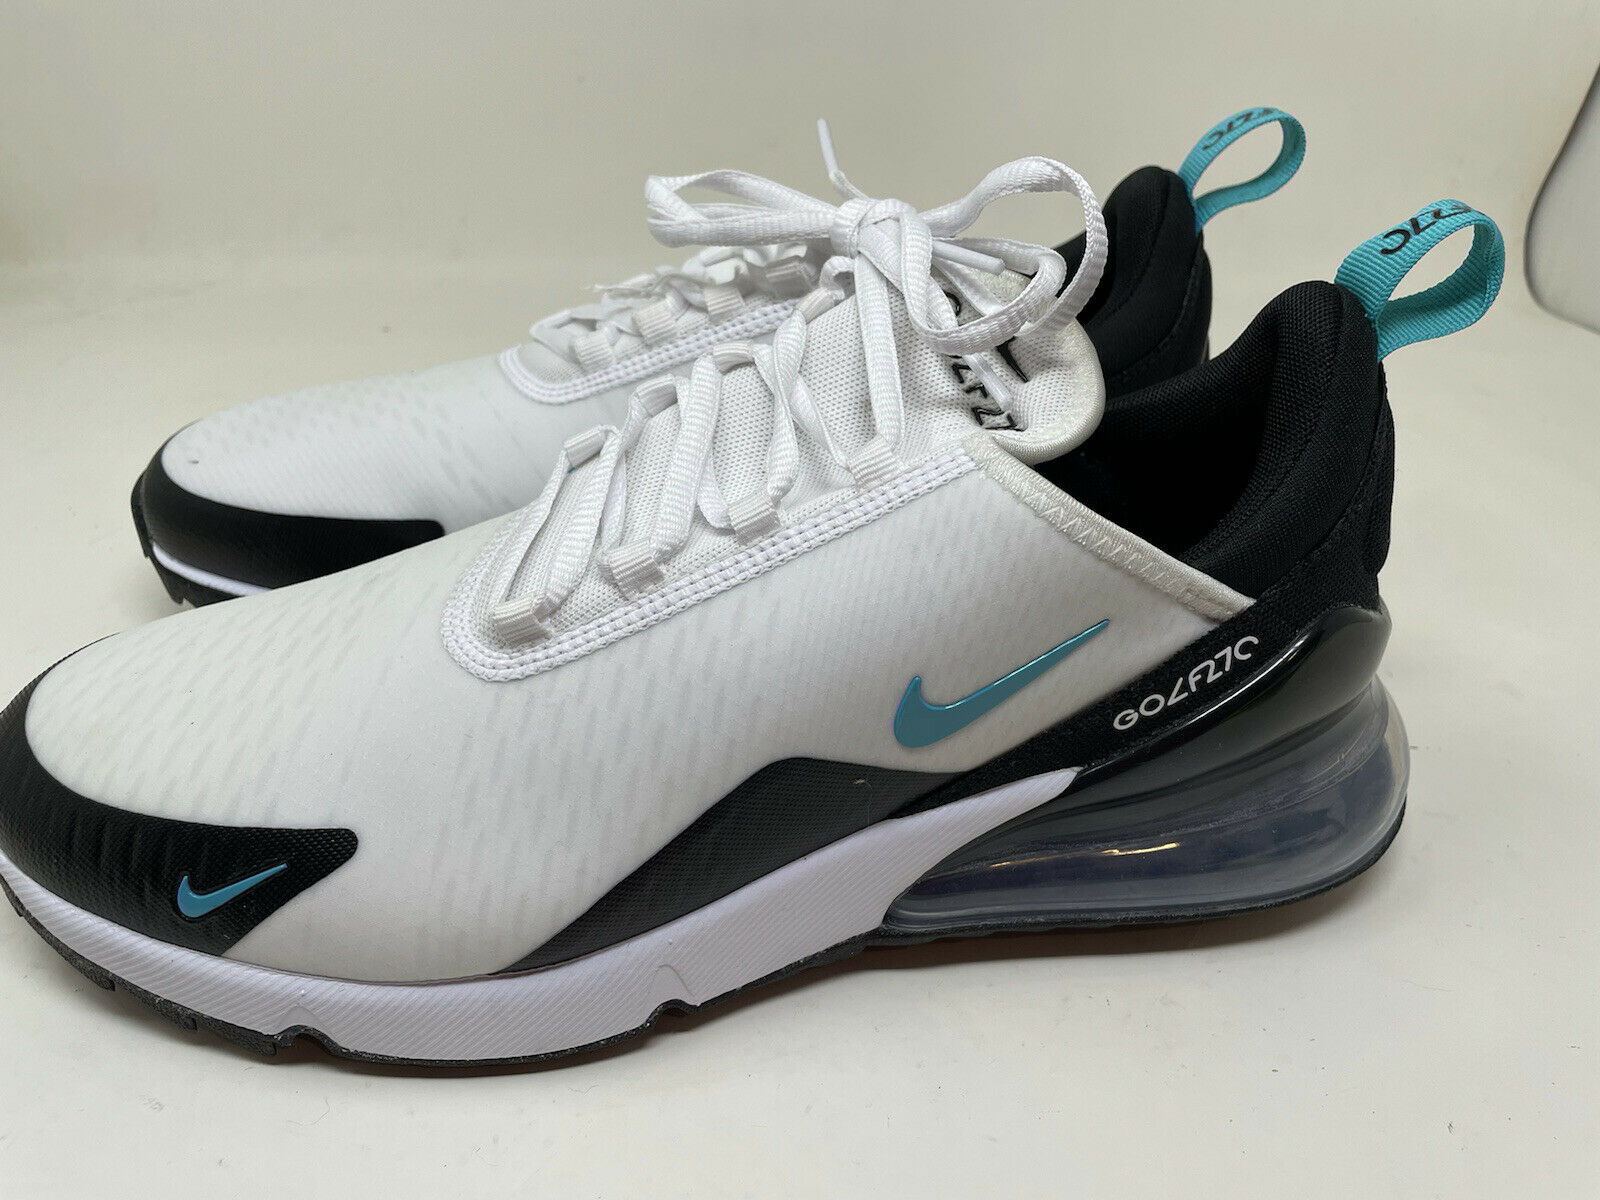 Nike Air Max 270 Golf 'Dusty Cactus' Shoes Men’s Size 8.5 On Sale Now